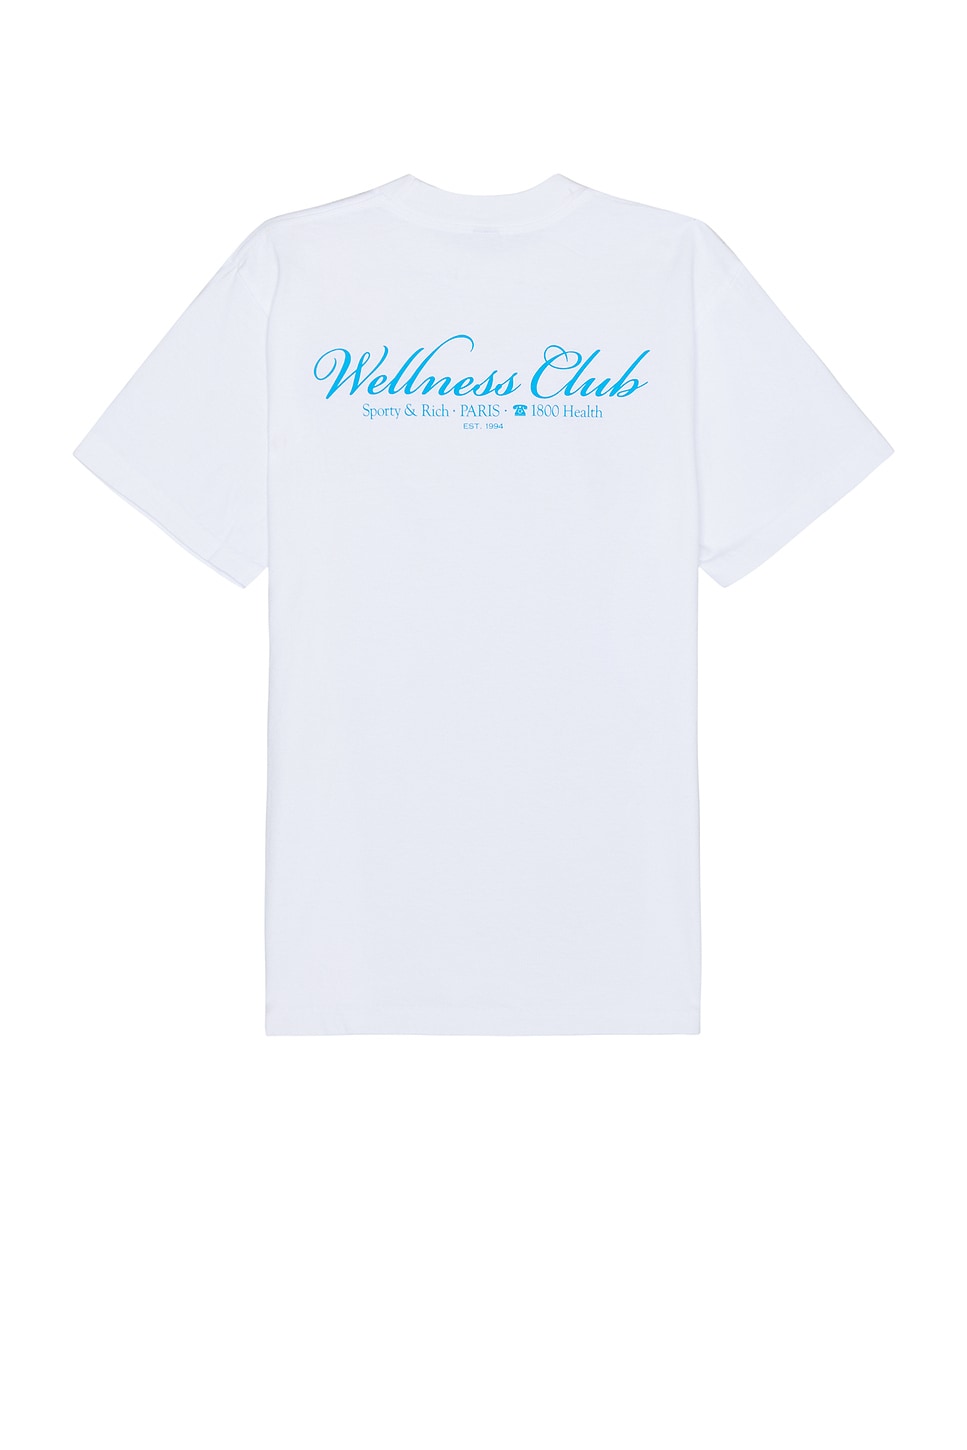 Image 1 of Sporty & Rich 1800 Health T-shirt in White